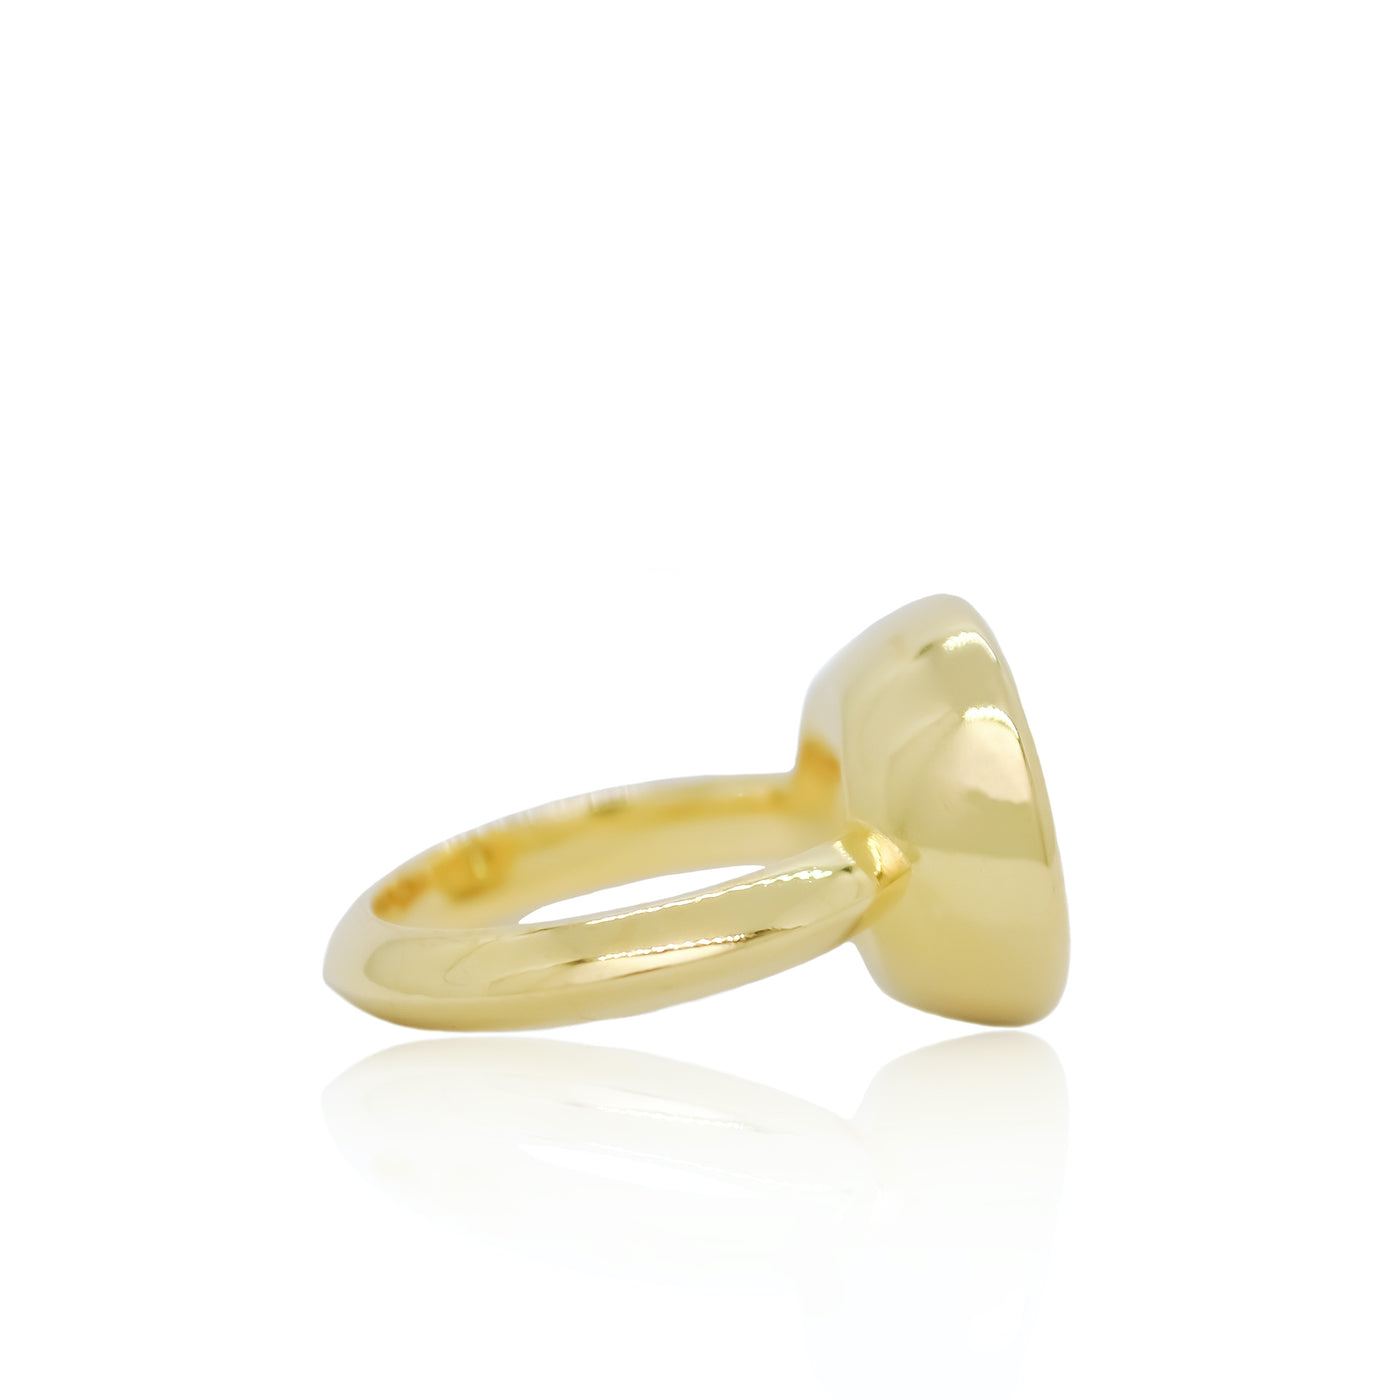 Solitaire cocktail ring in gold with citrine from Atelier ORMAN